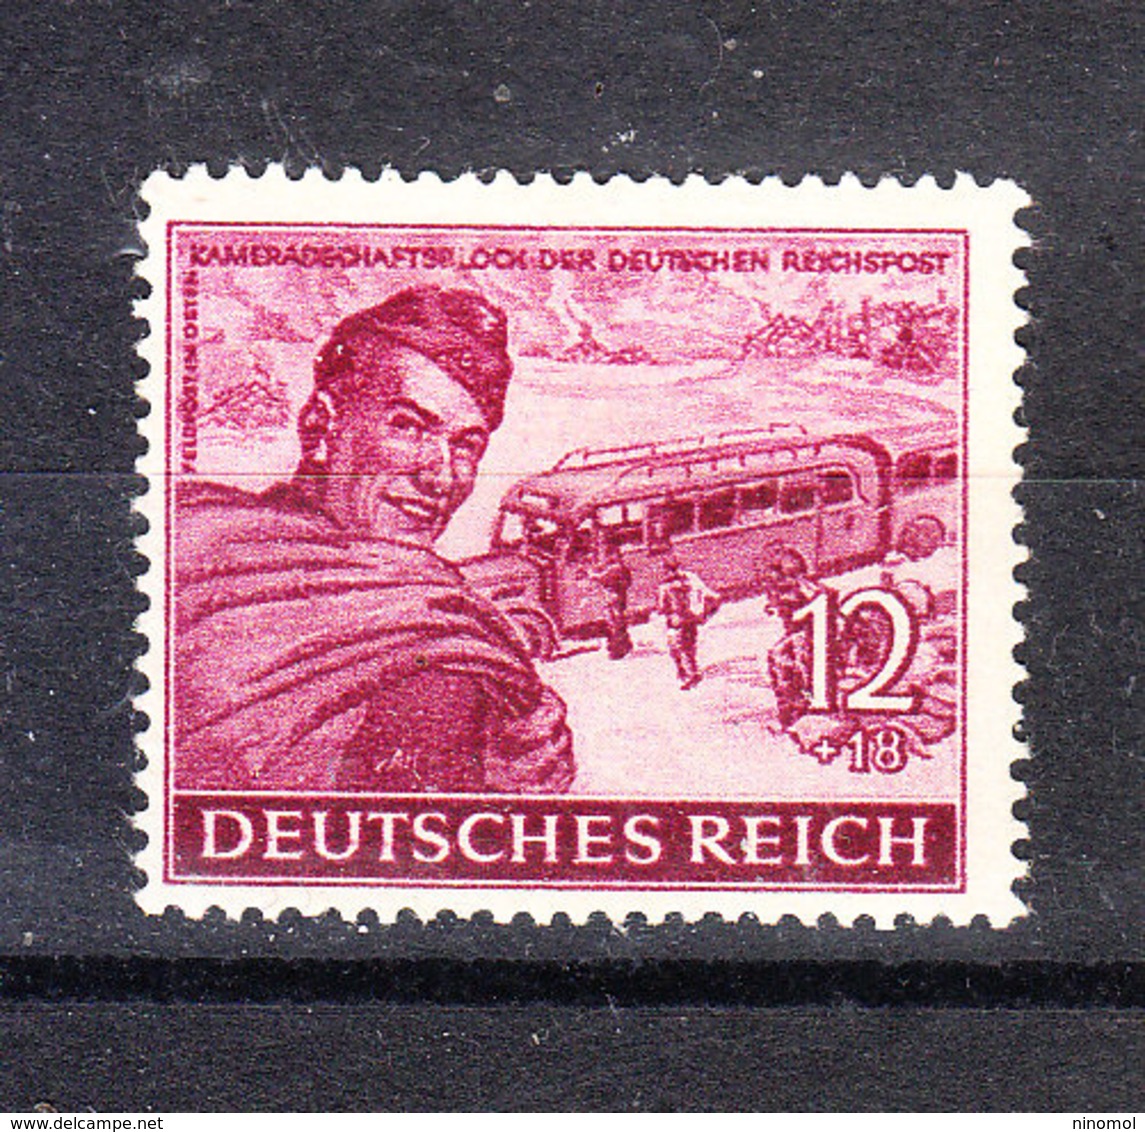 Germania Reich   -   1944.  Postino E Bus. Postman And Bus. MNH - Busses